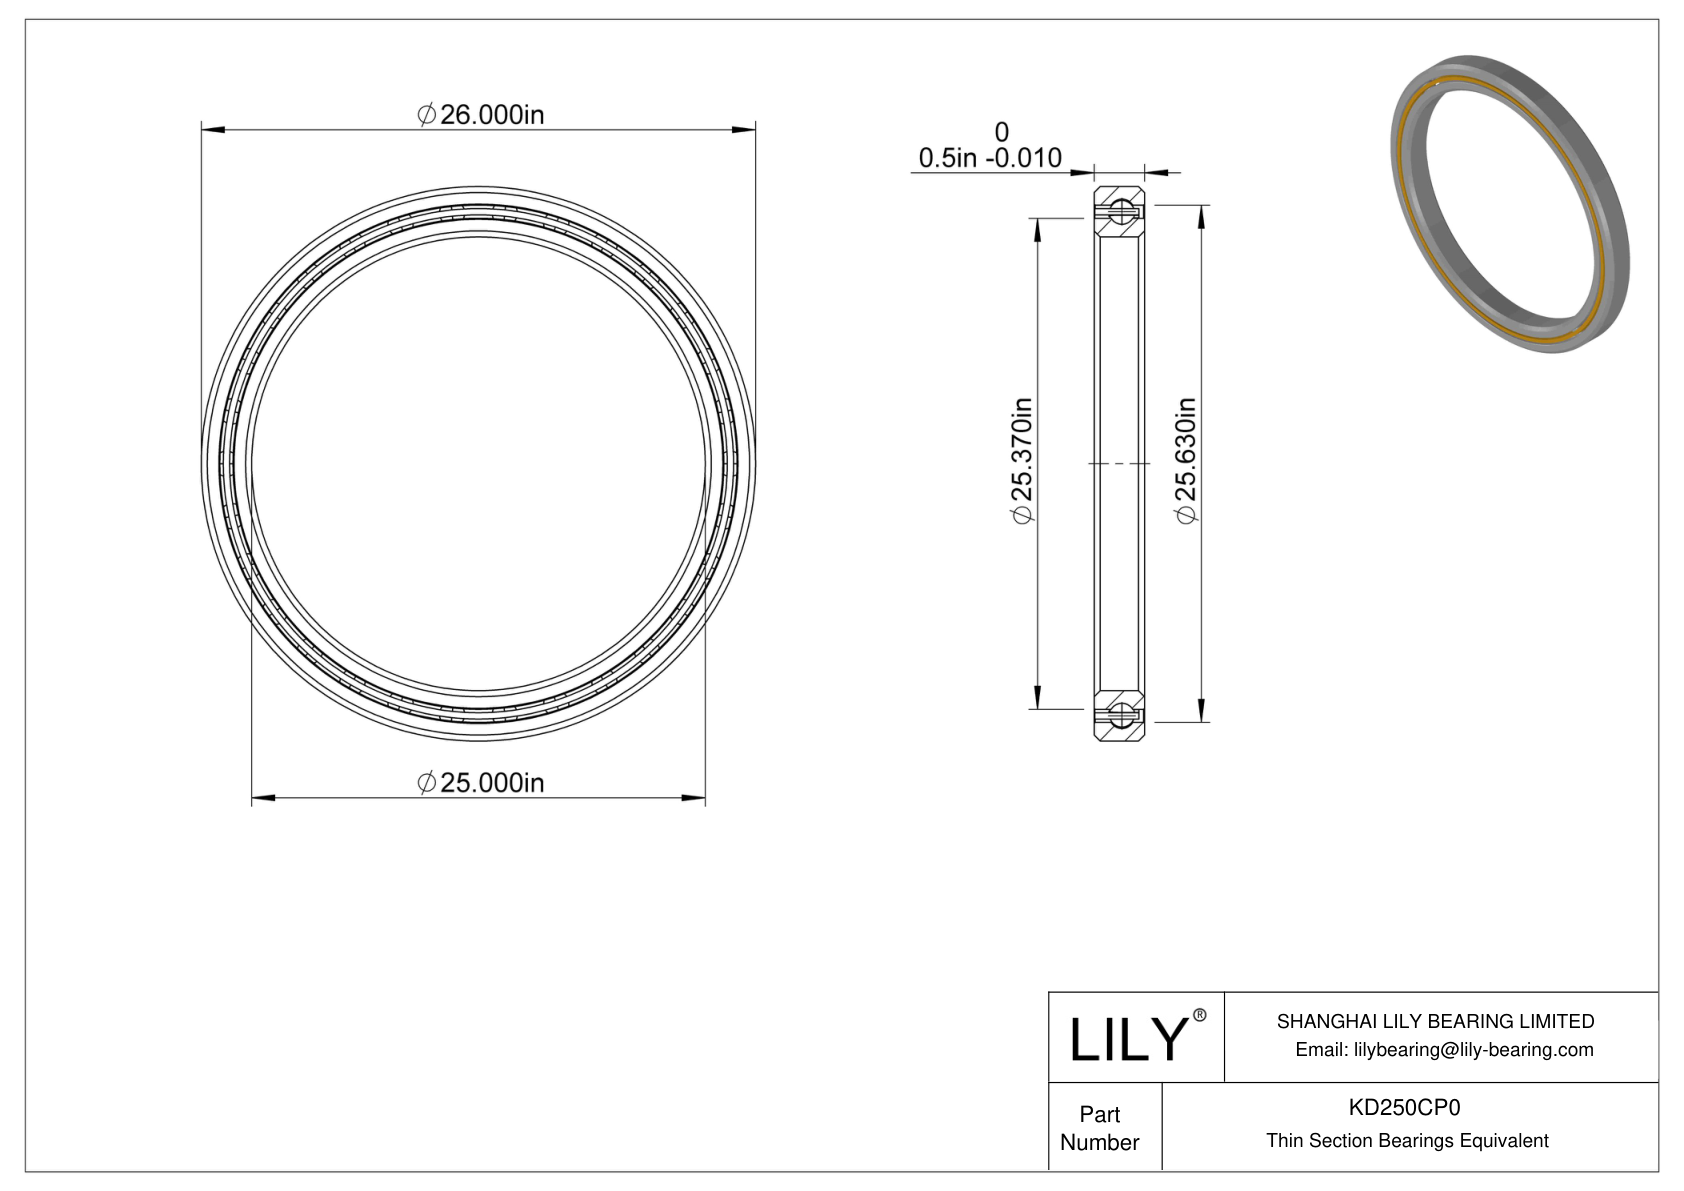 KD250CP0 Constant Section (CS) Bearings cad drawing